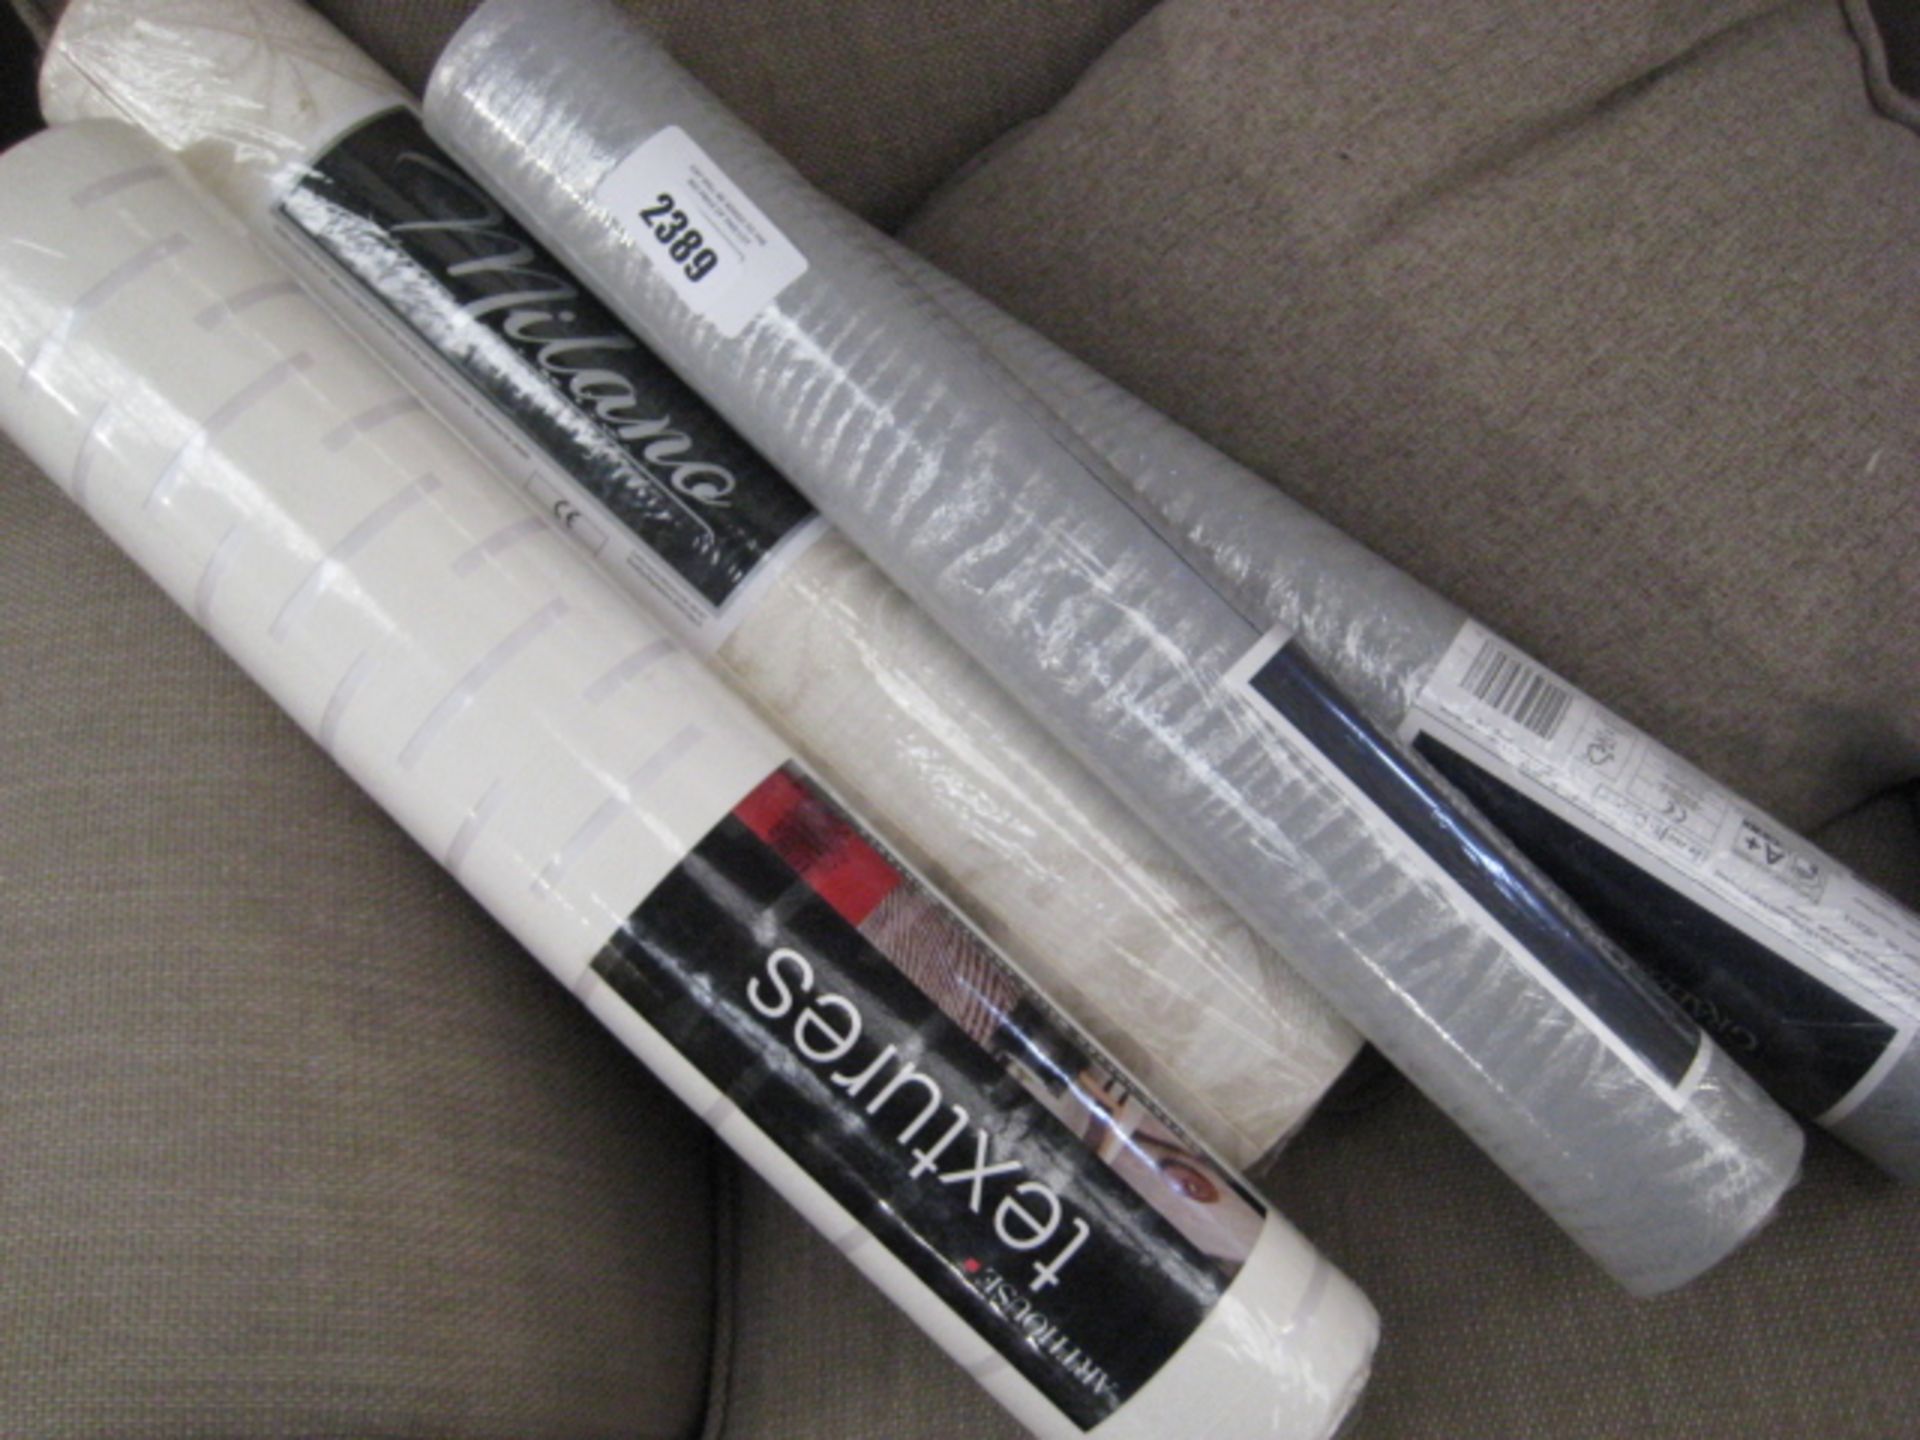 2 rolls of grey wallpaper, 1 roll of Milano and 1 roll of Art House patterned wallpaper